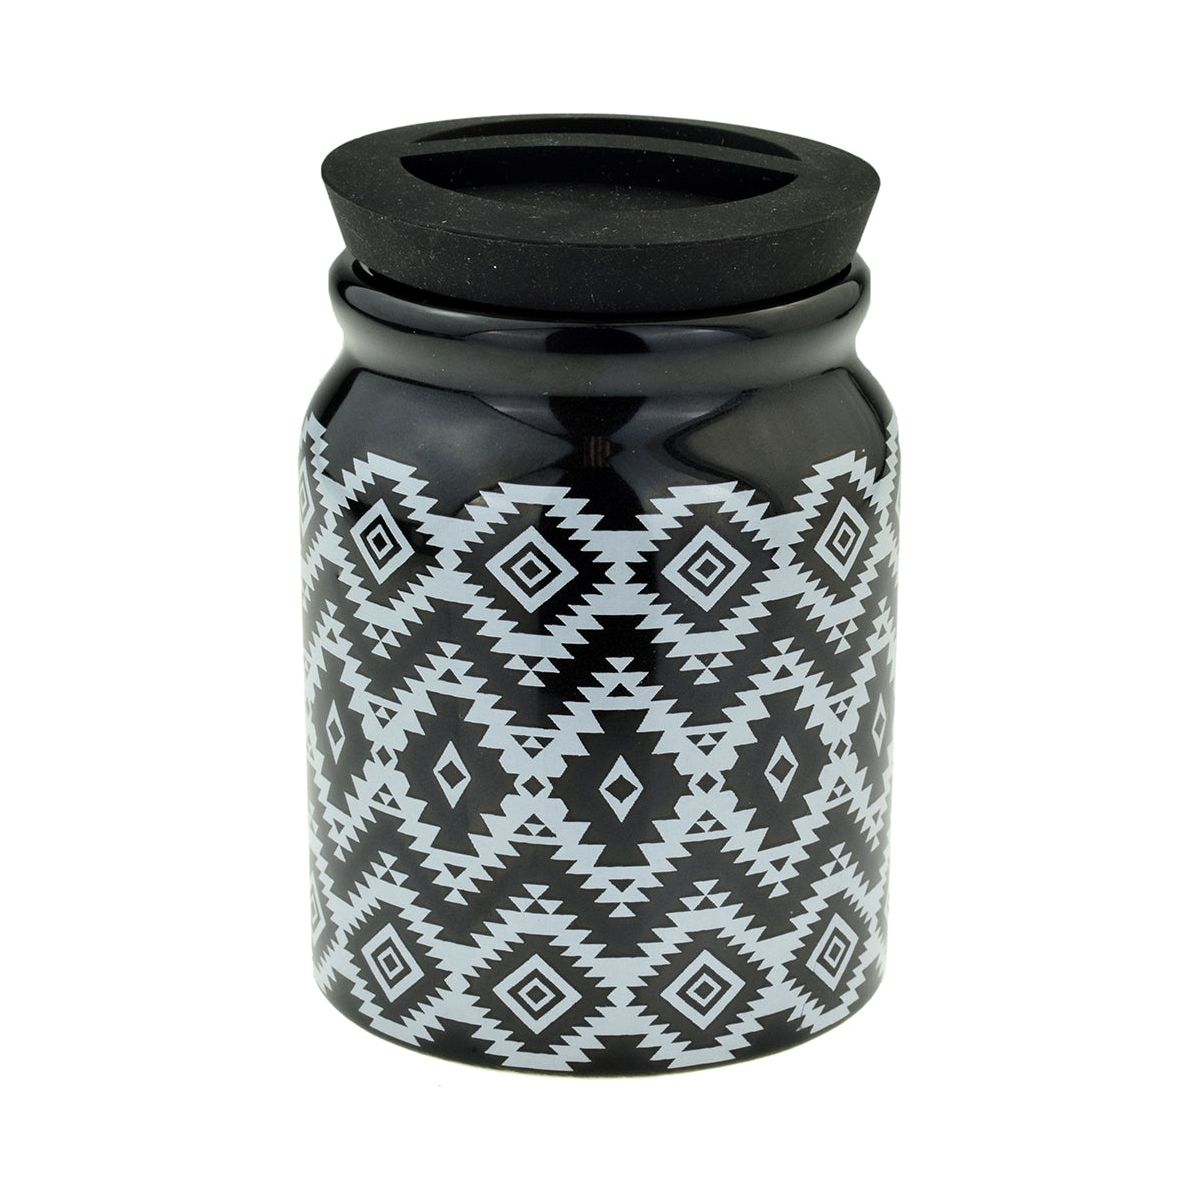 Aztec Ceramic Tobacco Jar With Rubber Lid Boxed - Ashton and Finch